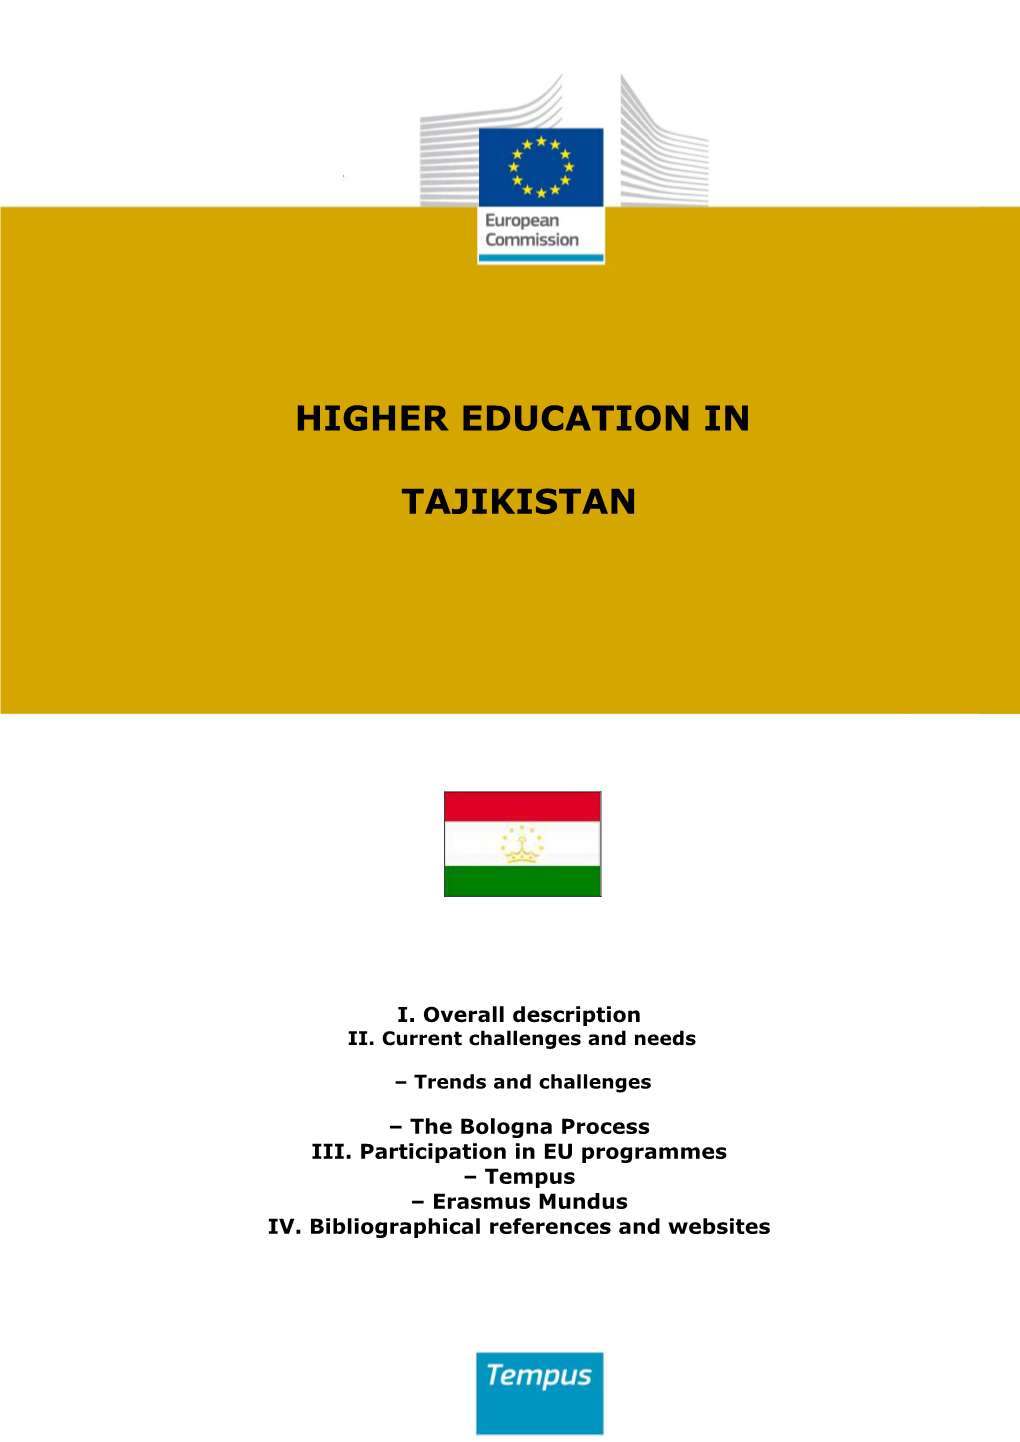 Higher Education in Tajikistan 2000, Relatively High Rates of Economic Has Changed Radically Since Independence